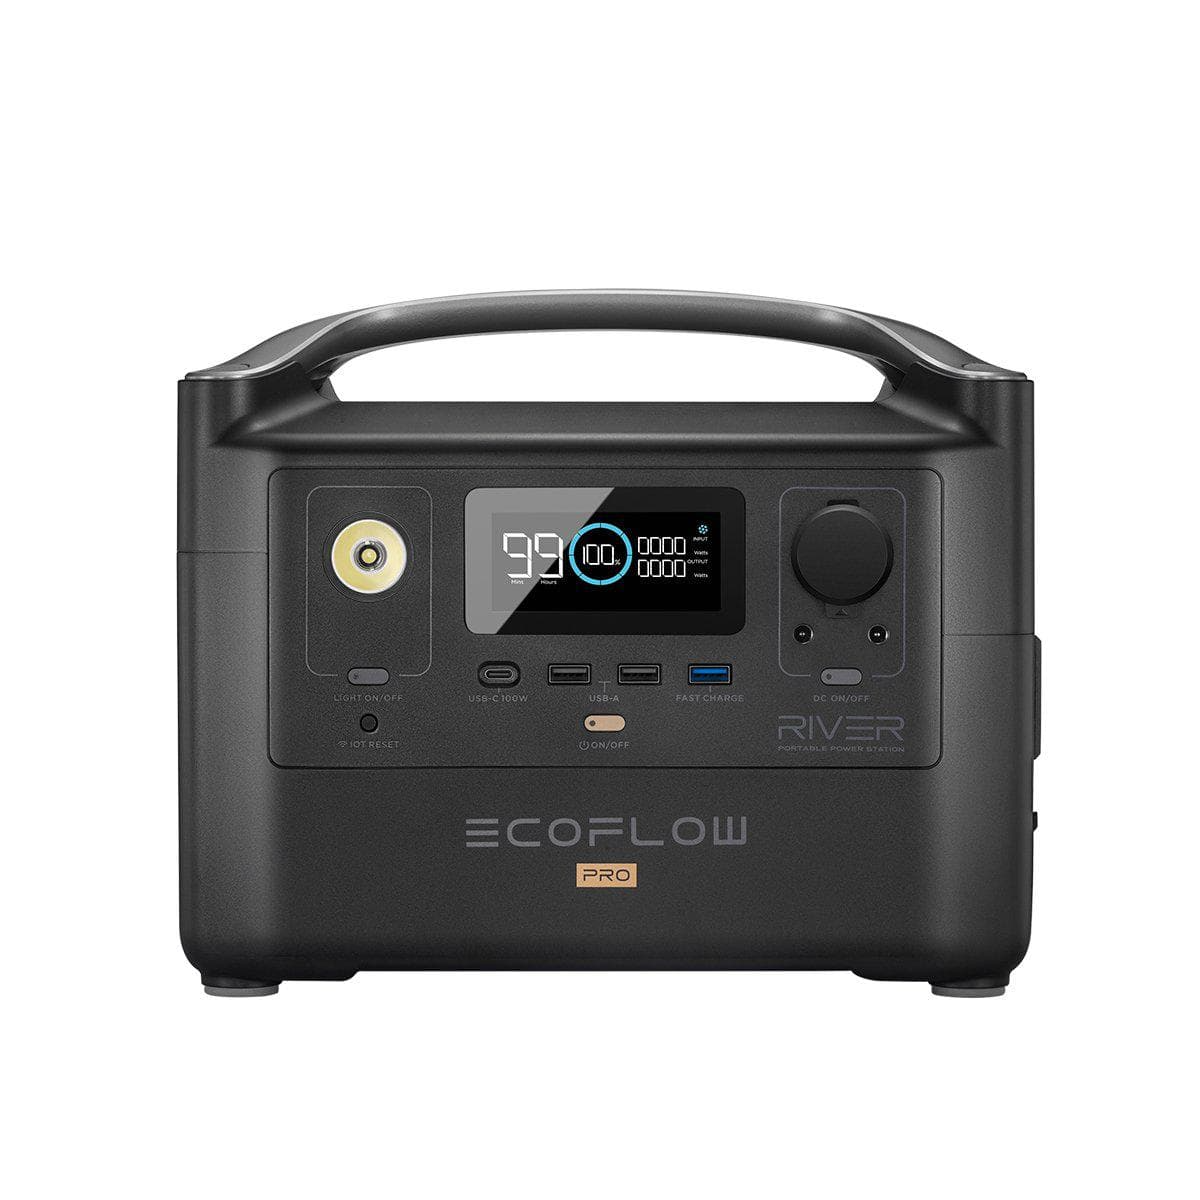 Ecoflow RIVER PRO Portable Power Station 720Wh, Power Multiple Devices, Recharge 0-80% Within 1 Hour, for Camping, RV, Outdoors, Off-Grid